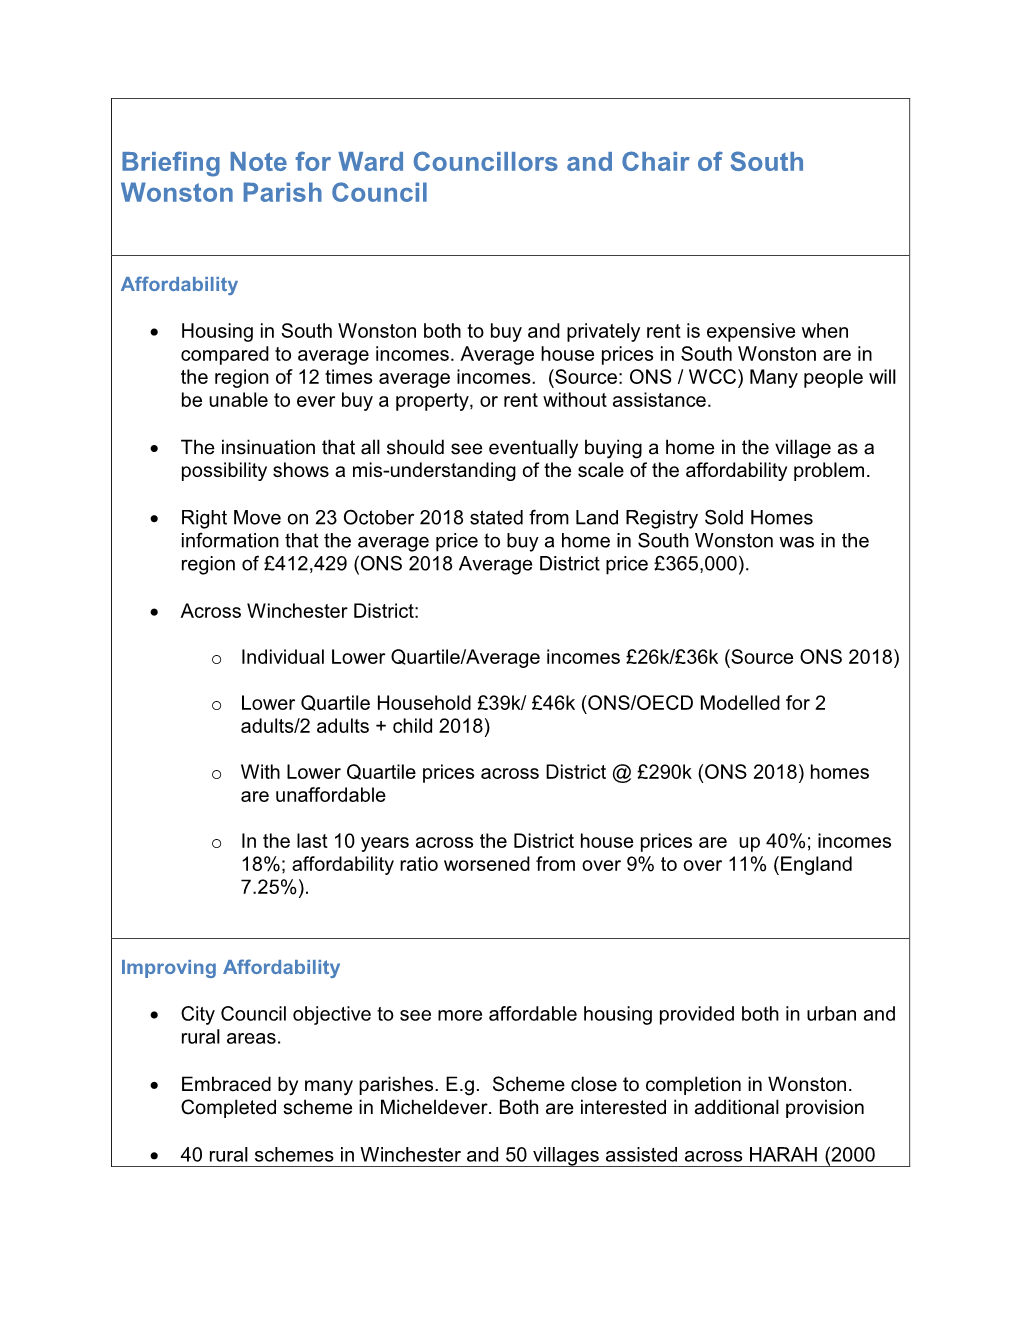 Briefing Note for Ward Councillors and Chair of South Wonston Parish Council